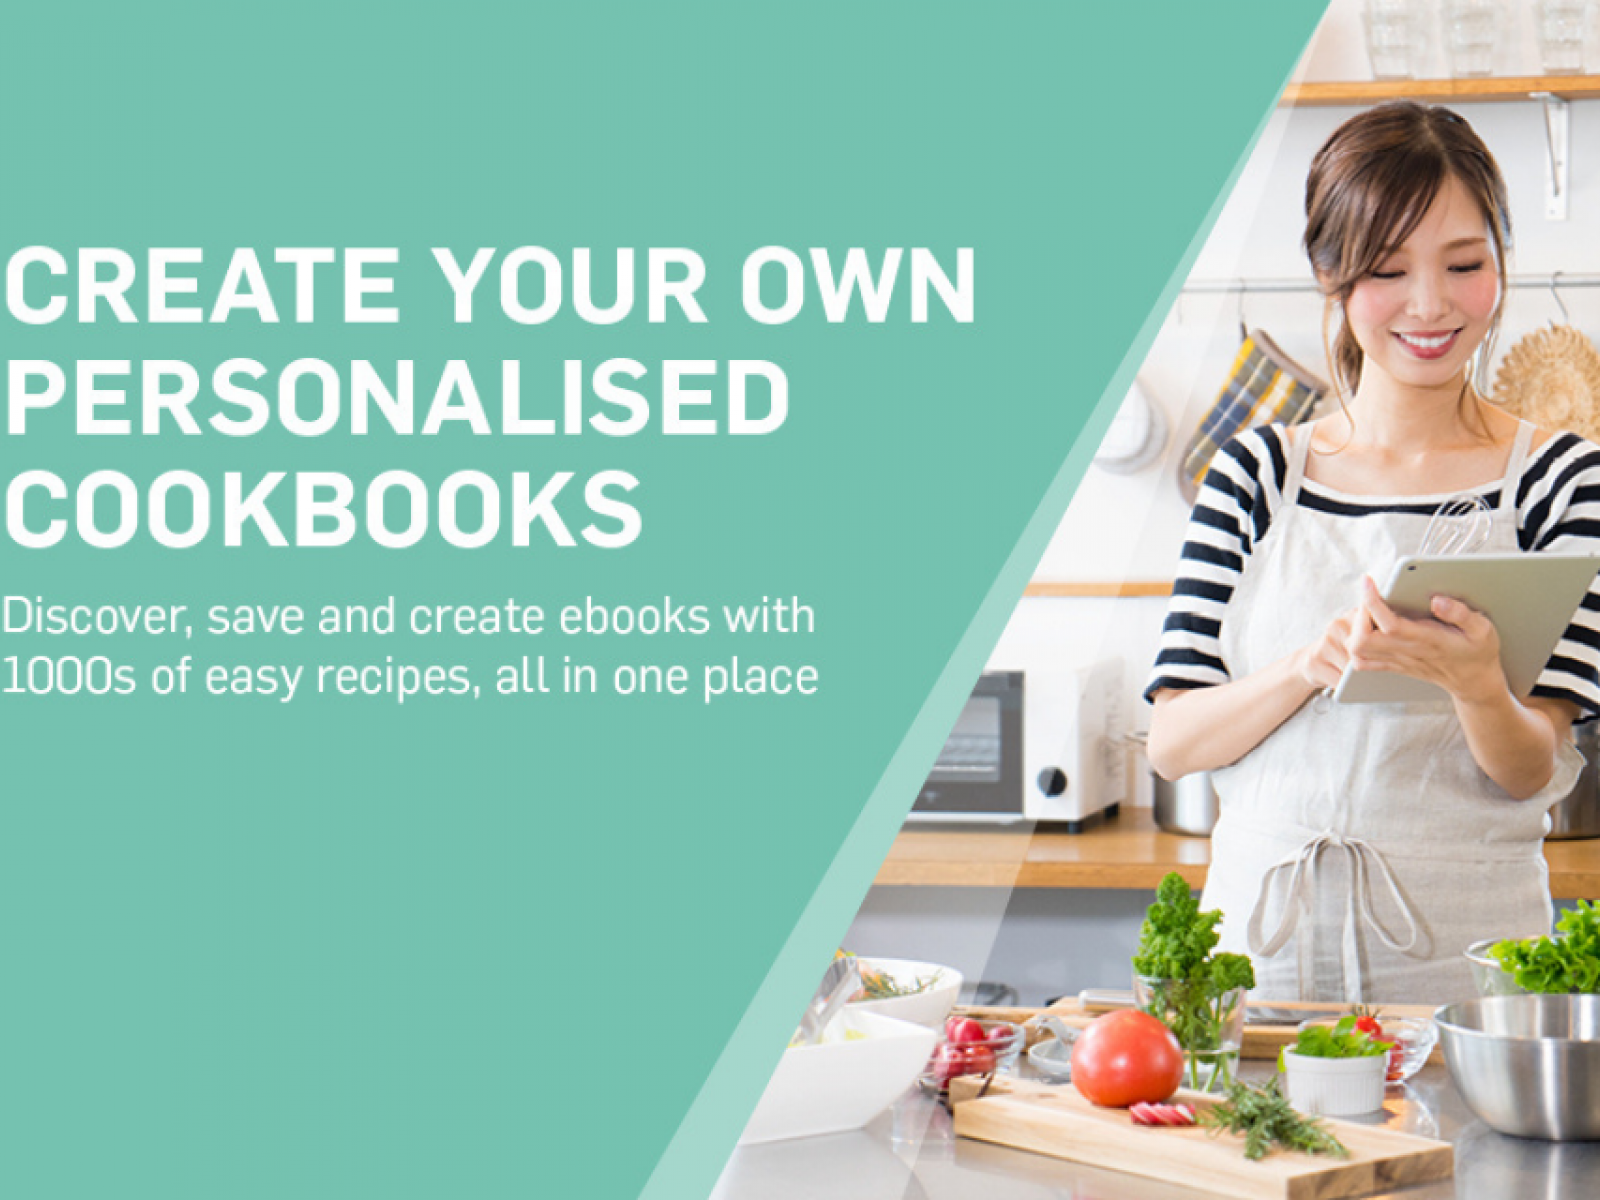 https://myfoodbook.com.au/sites/default/files/styles/4x3/public/collections_image/2022_carousel_promo_create_your_own_cookbooks.png